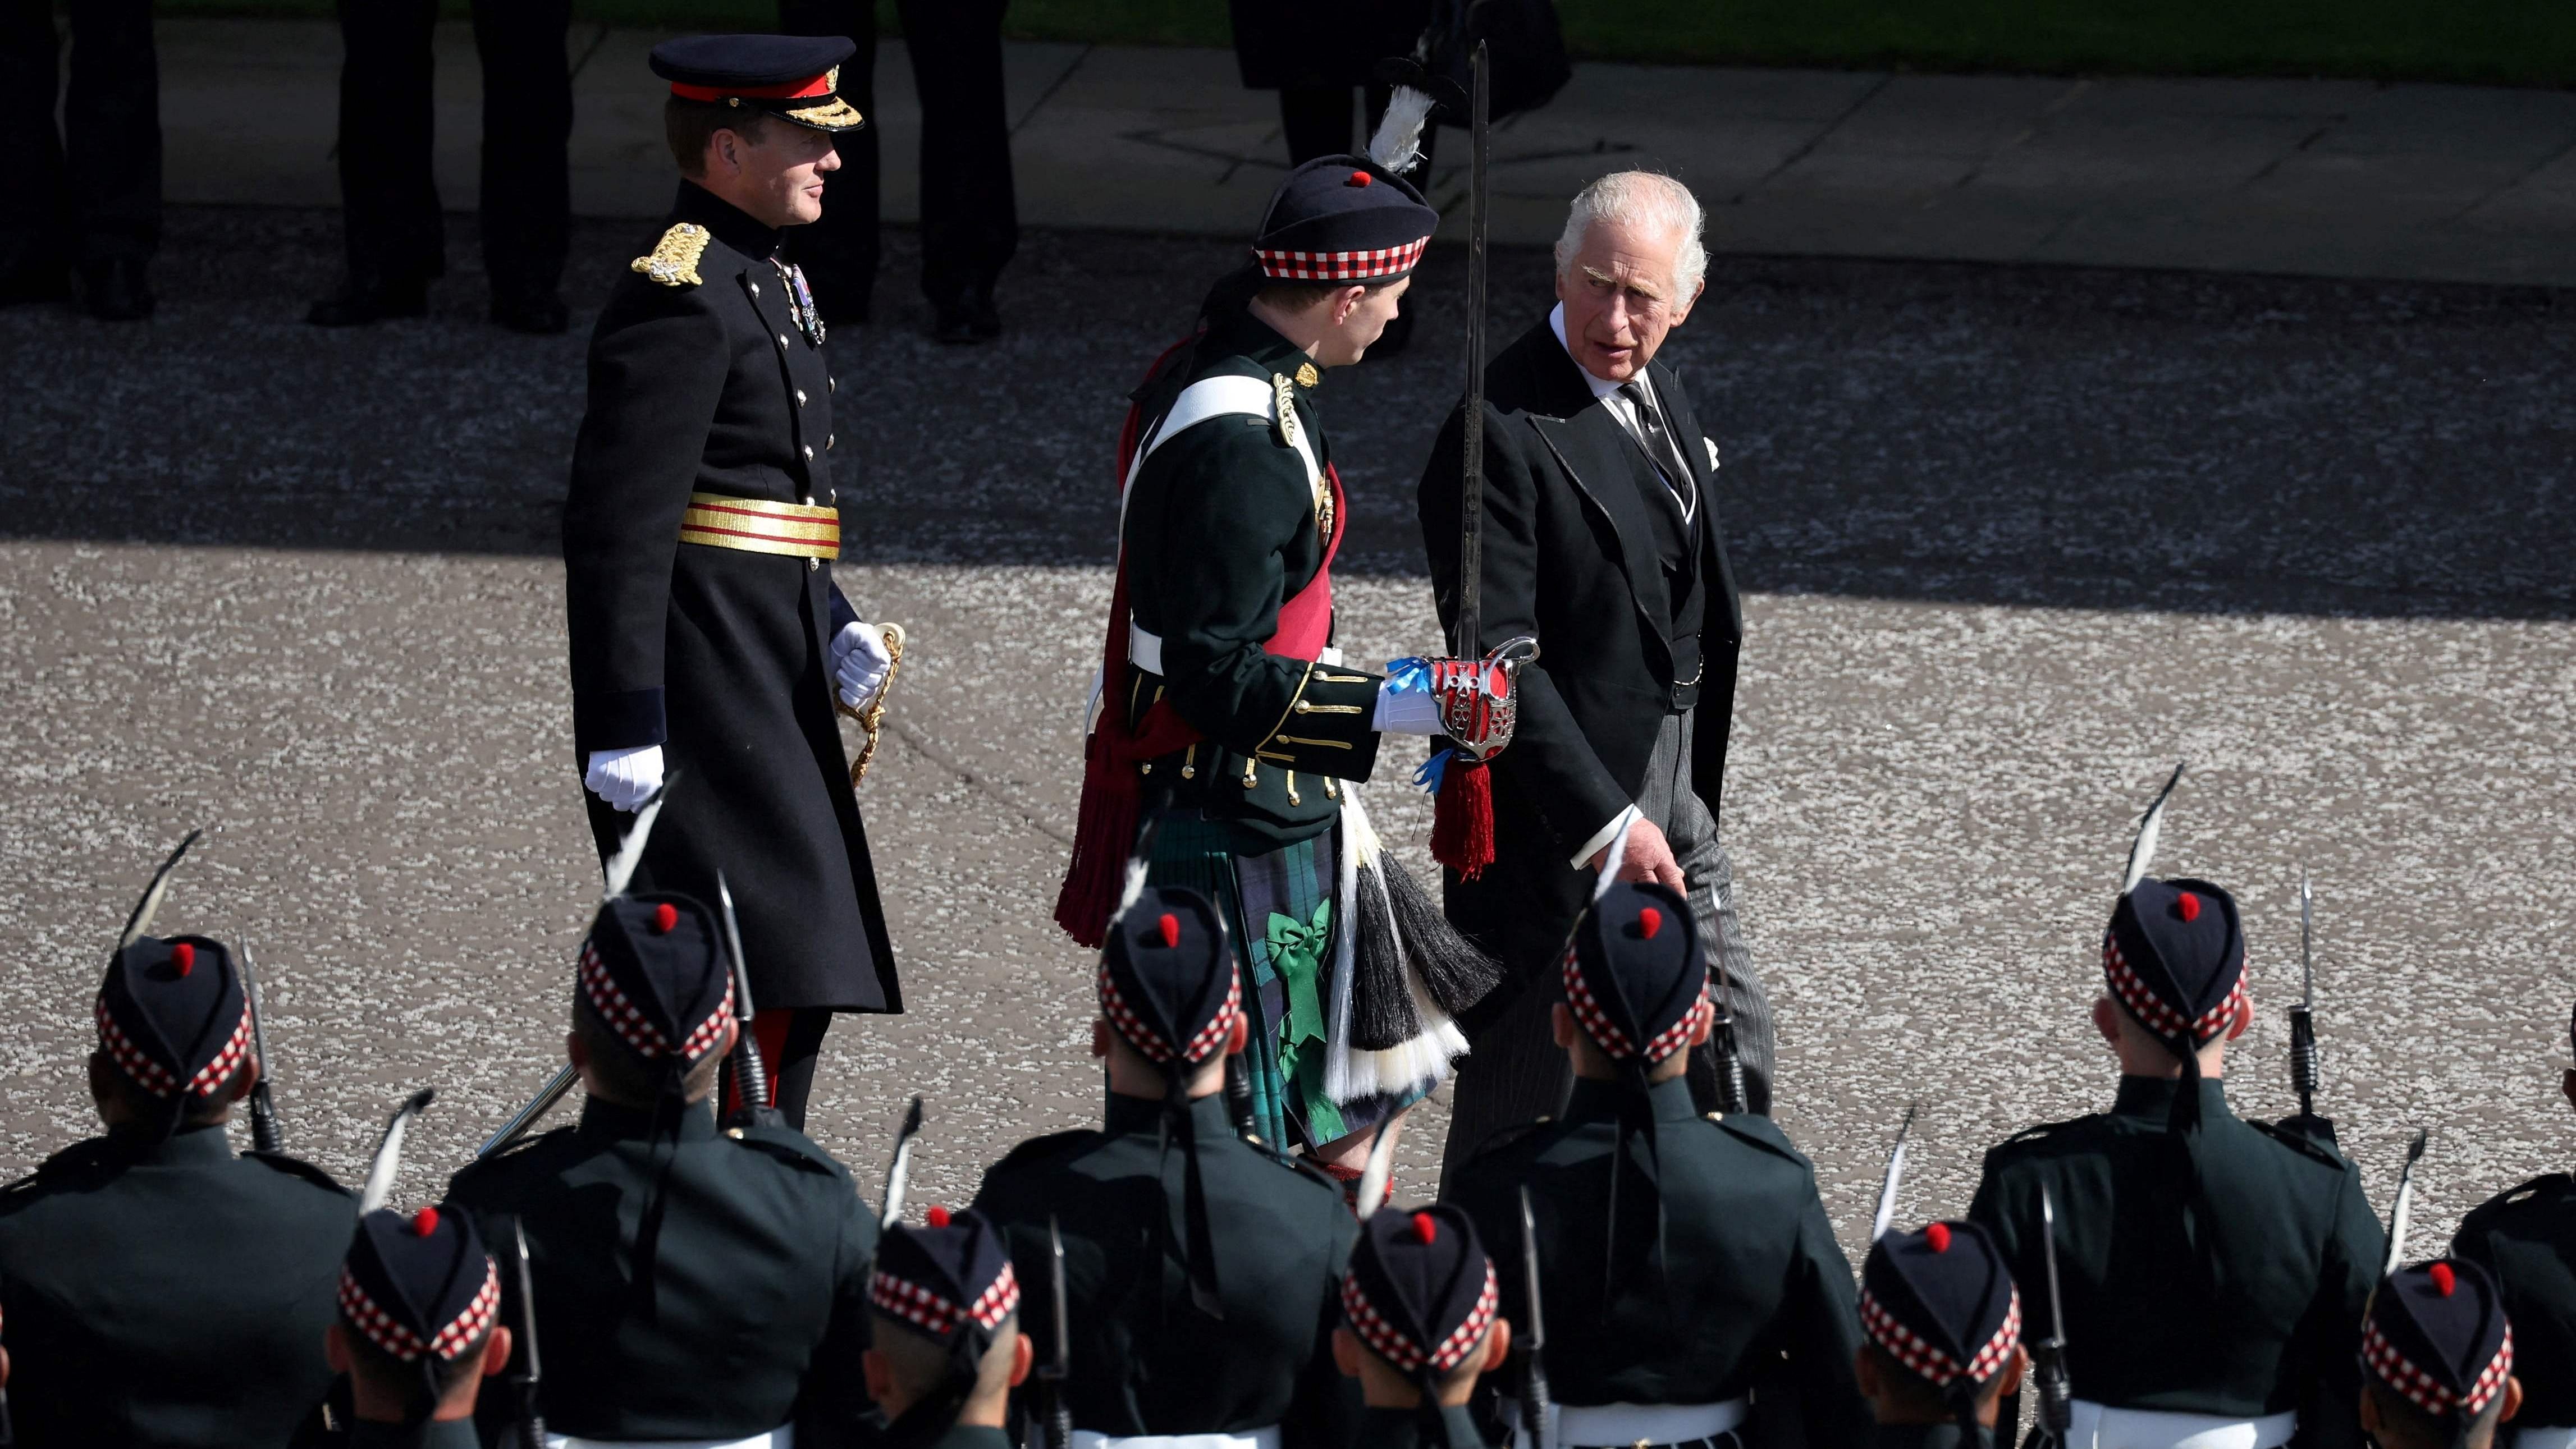 Britain's King Charles III inspects an Honour Guard as he arrives at the Palace of Holyroodhouse, in Edinburgh, on September 12, 2022. Credit: AFP Photo